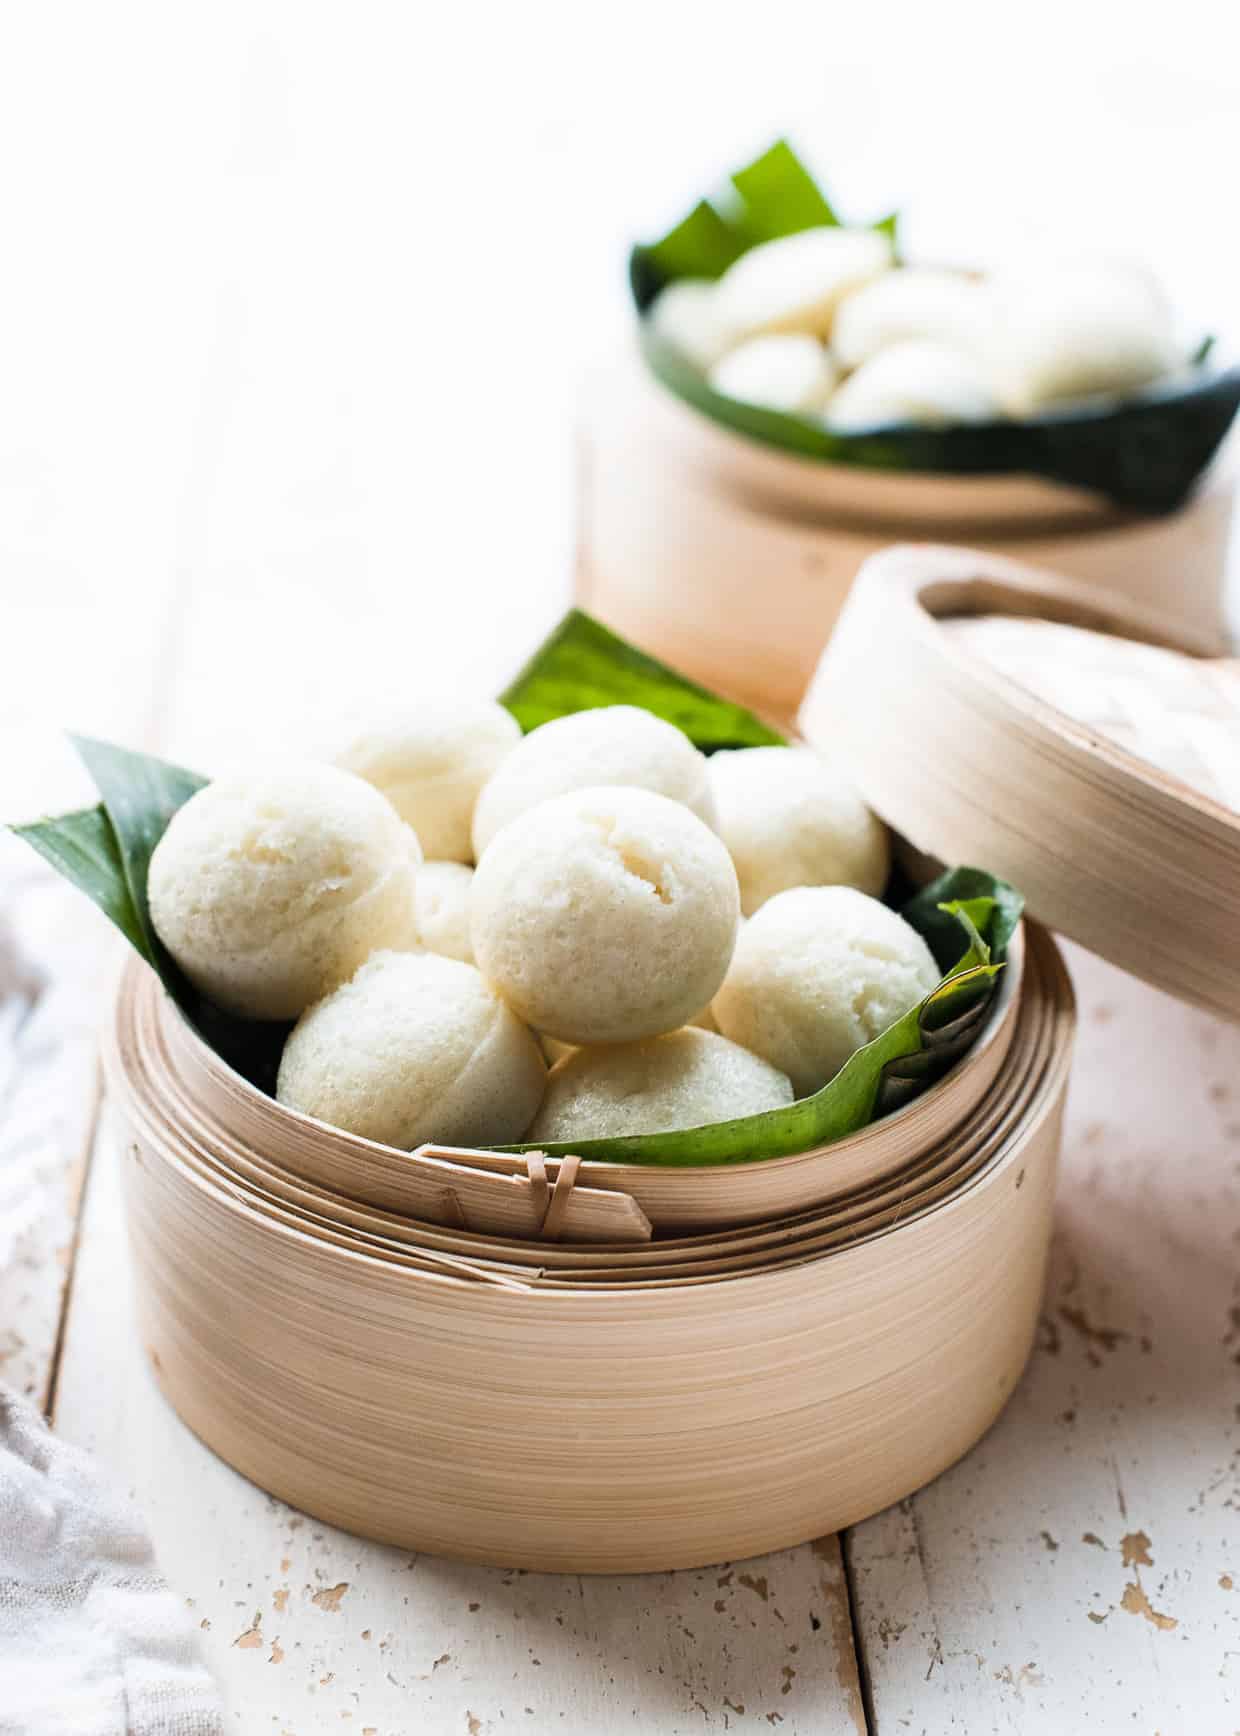 Puto - steamed rice cakes from the Philippines - in a bamboo steamer.